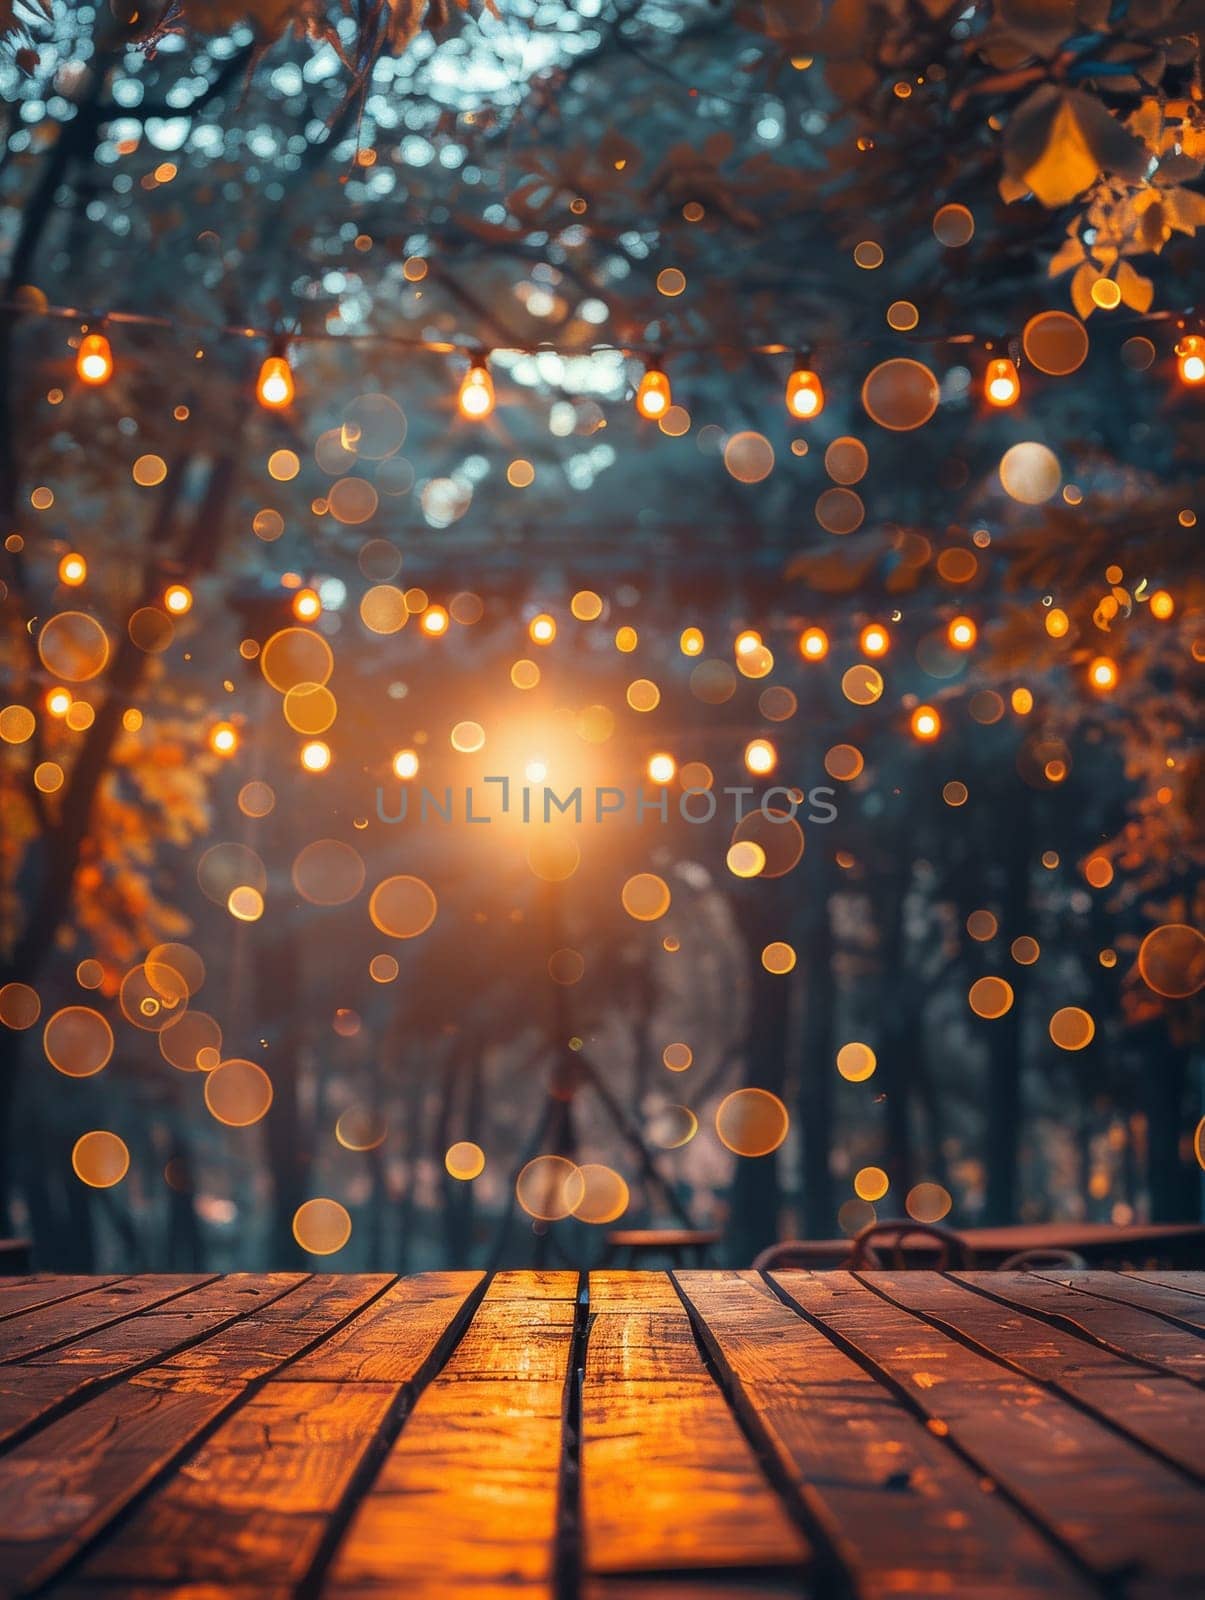 A wooden table with lights shining on it. The lights are creating a warm and inviting atmosphere. The table is surrounded by trees, which adds to the natural and peaceful feel of the scene